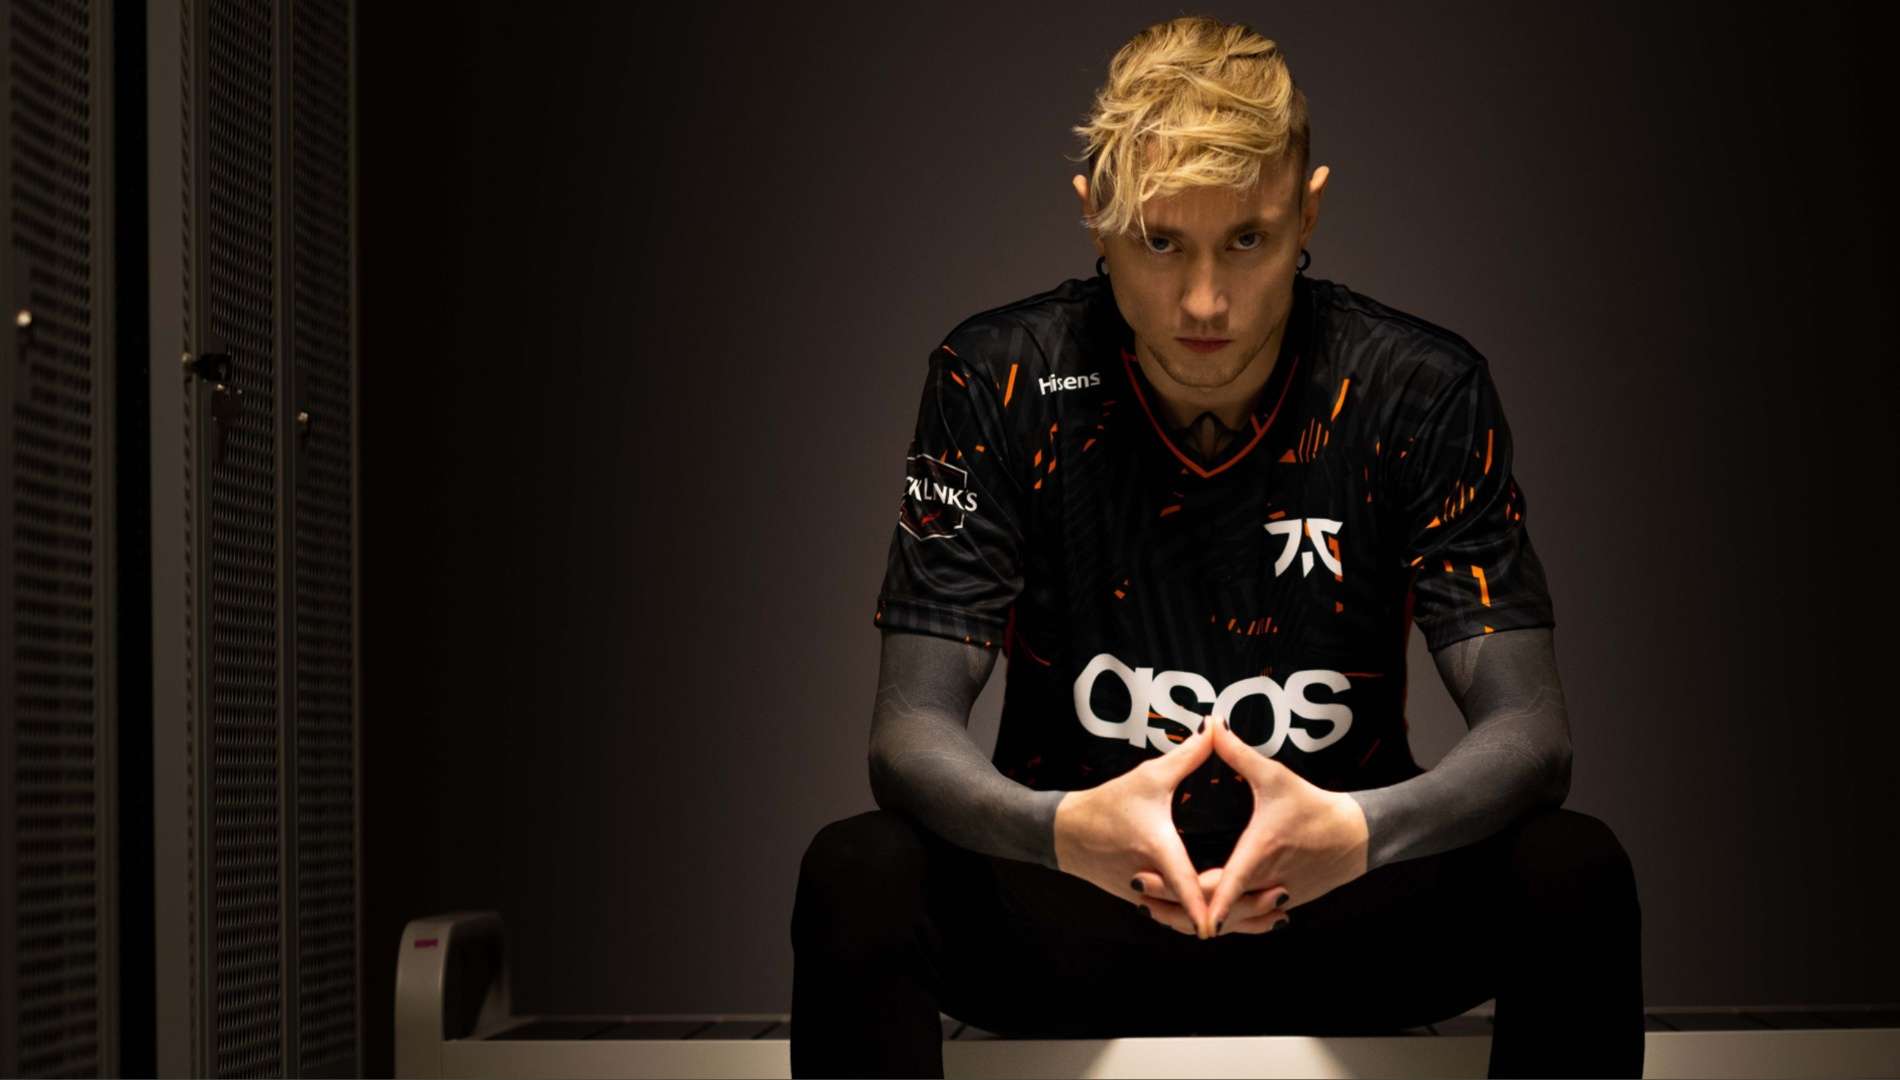 An image of Rekkles by Fnatic